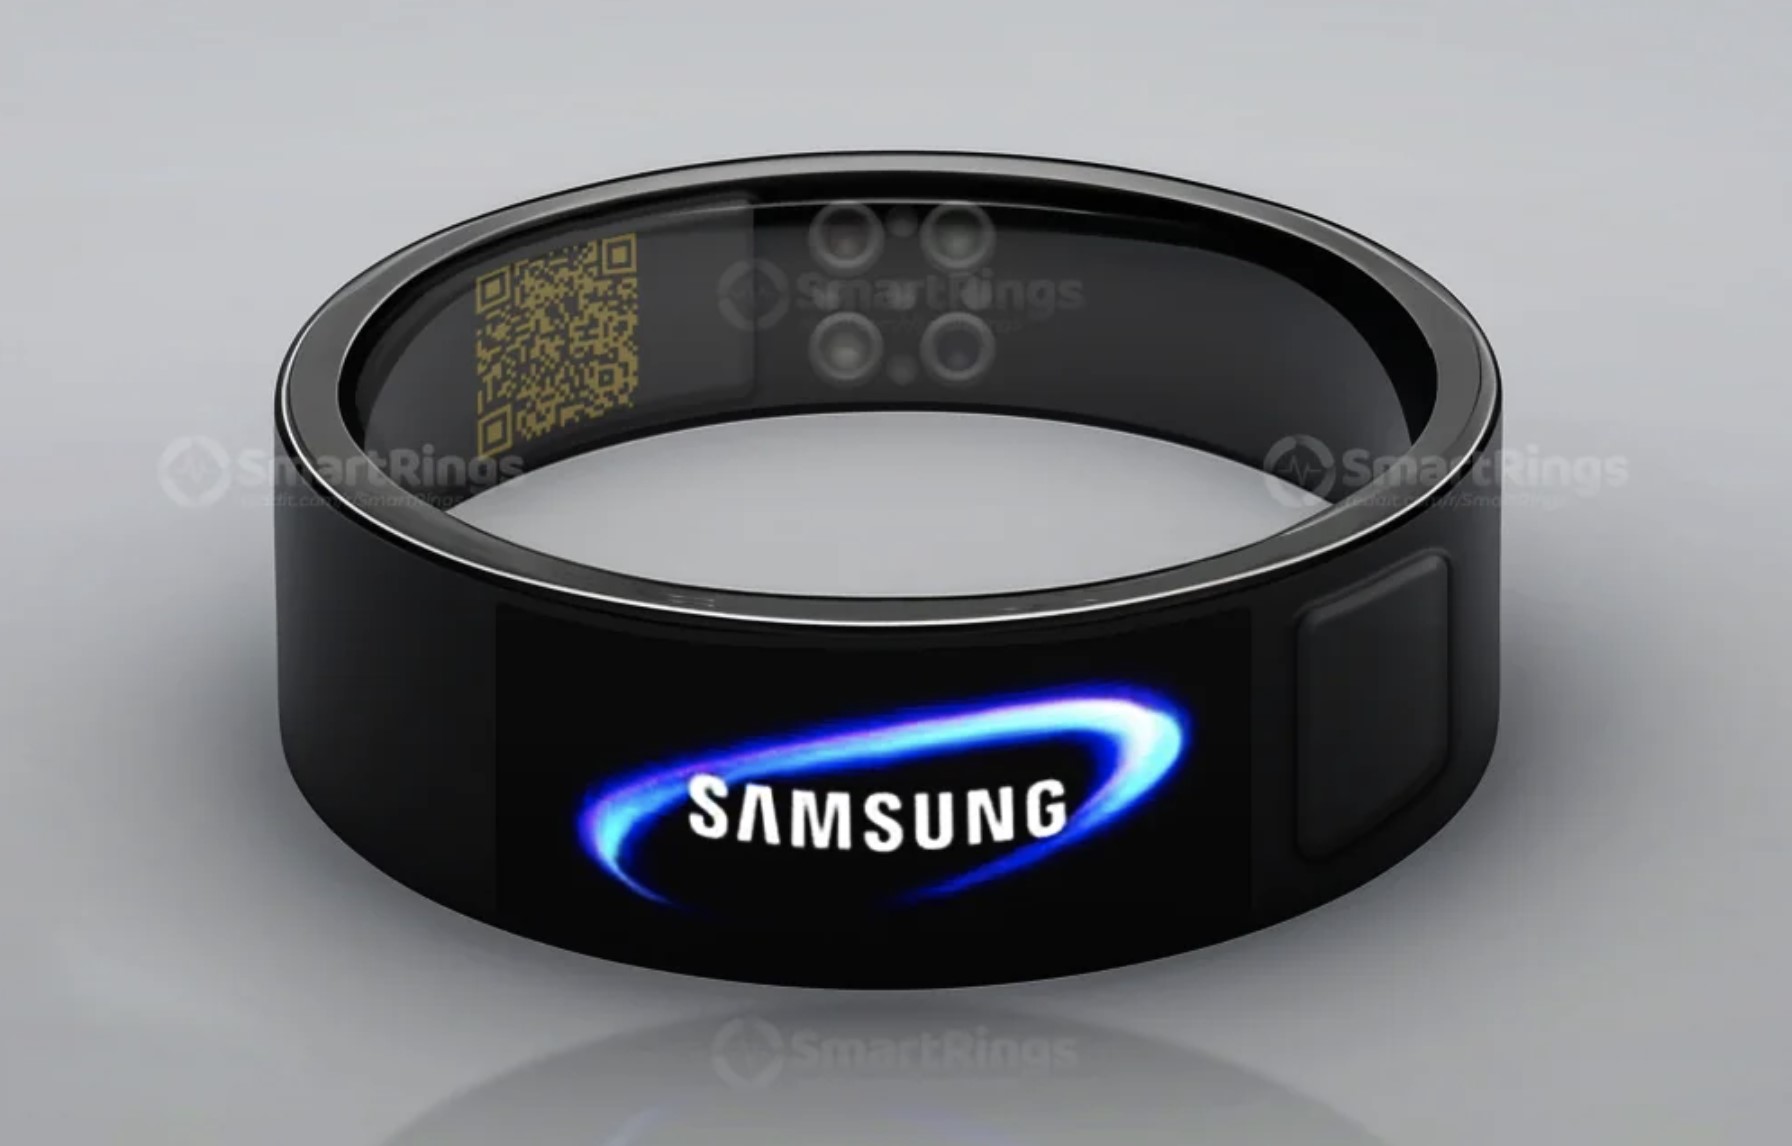 The release of the Samsung Galaxy Ring has been delayed, but it could arrive next year